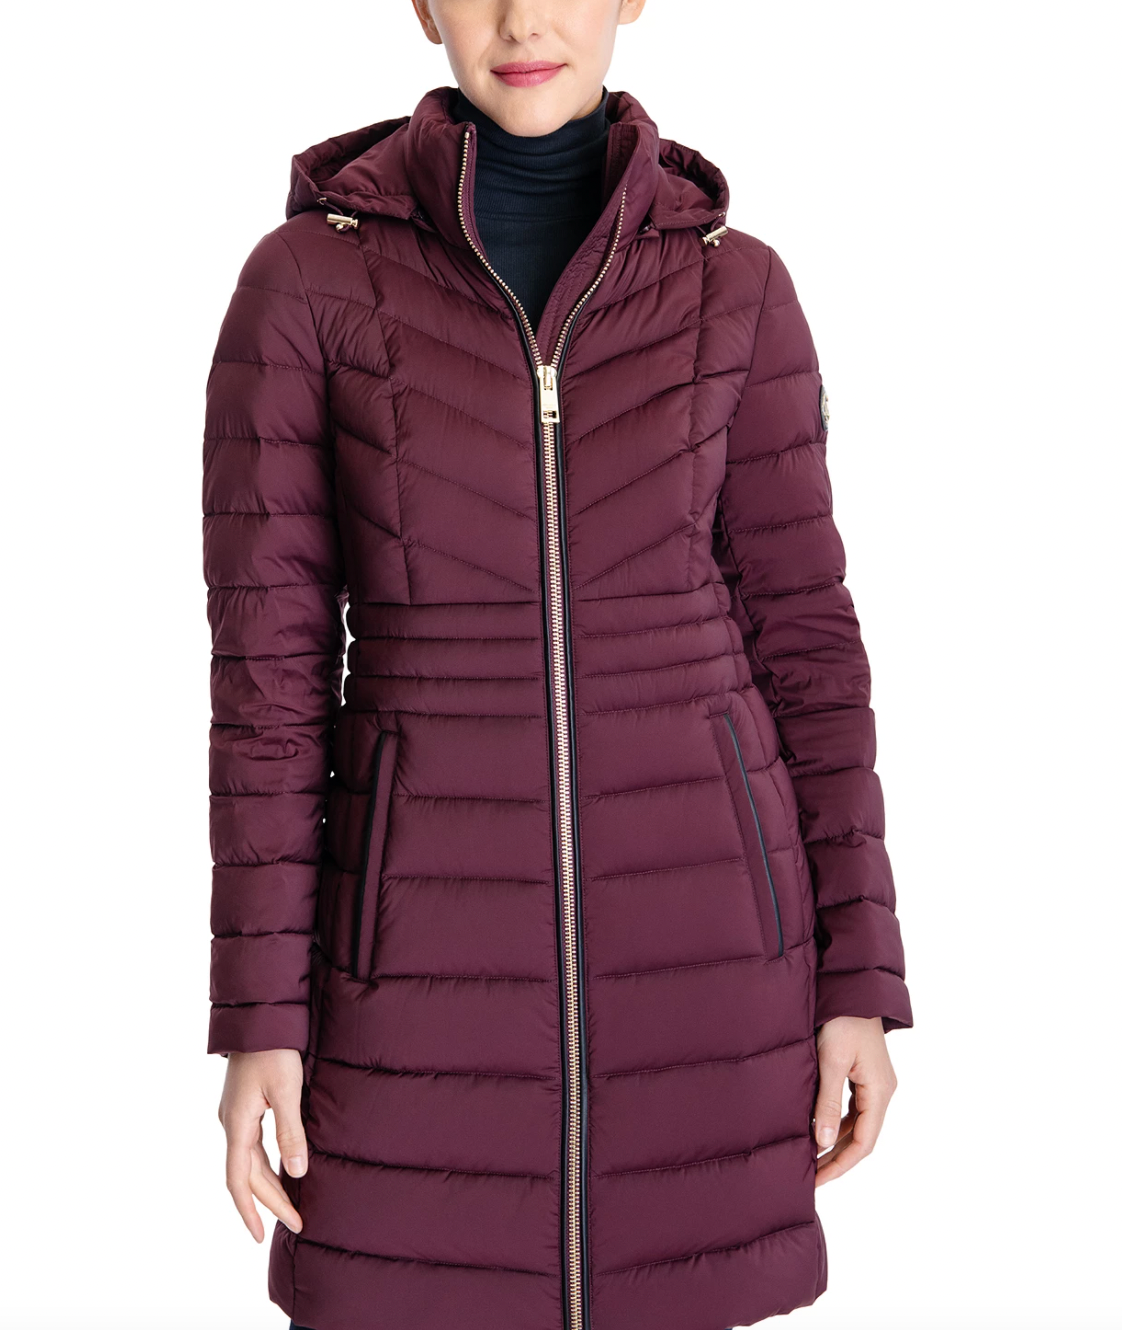 Michael Kors Hooded Stretch Packable Down Puffer Coat